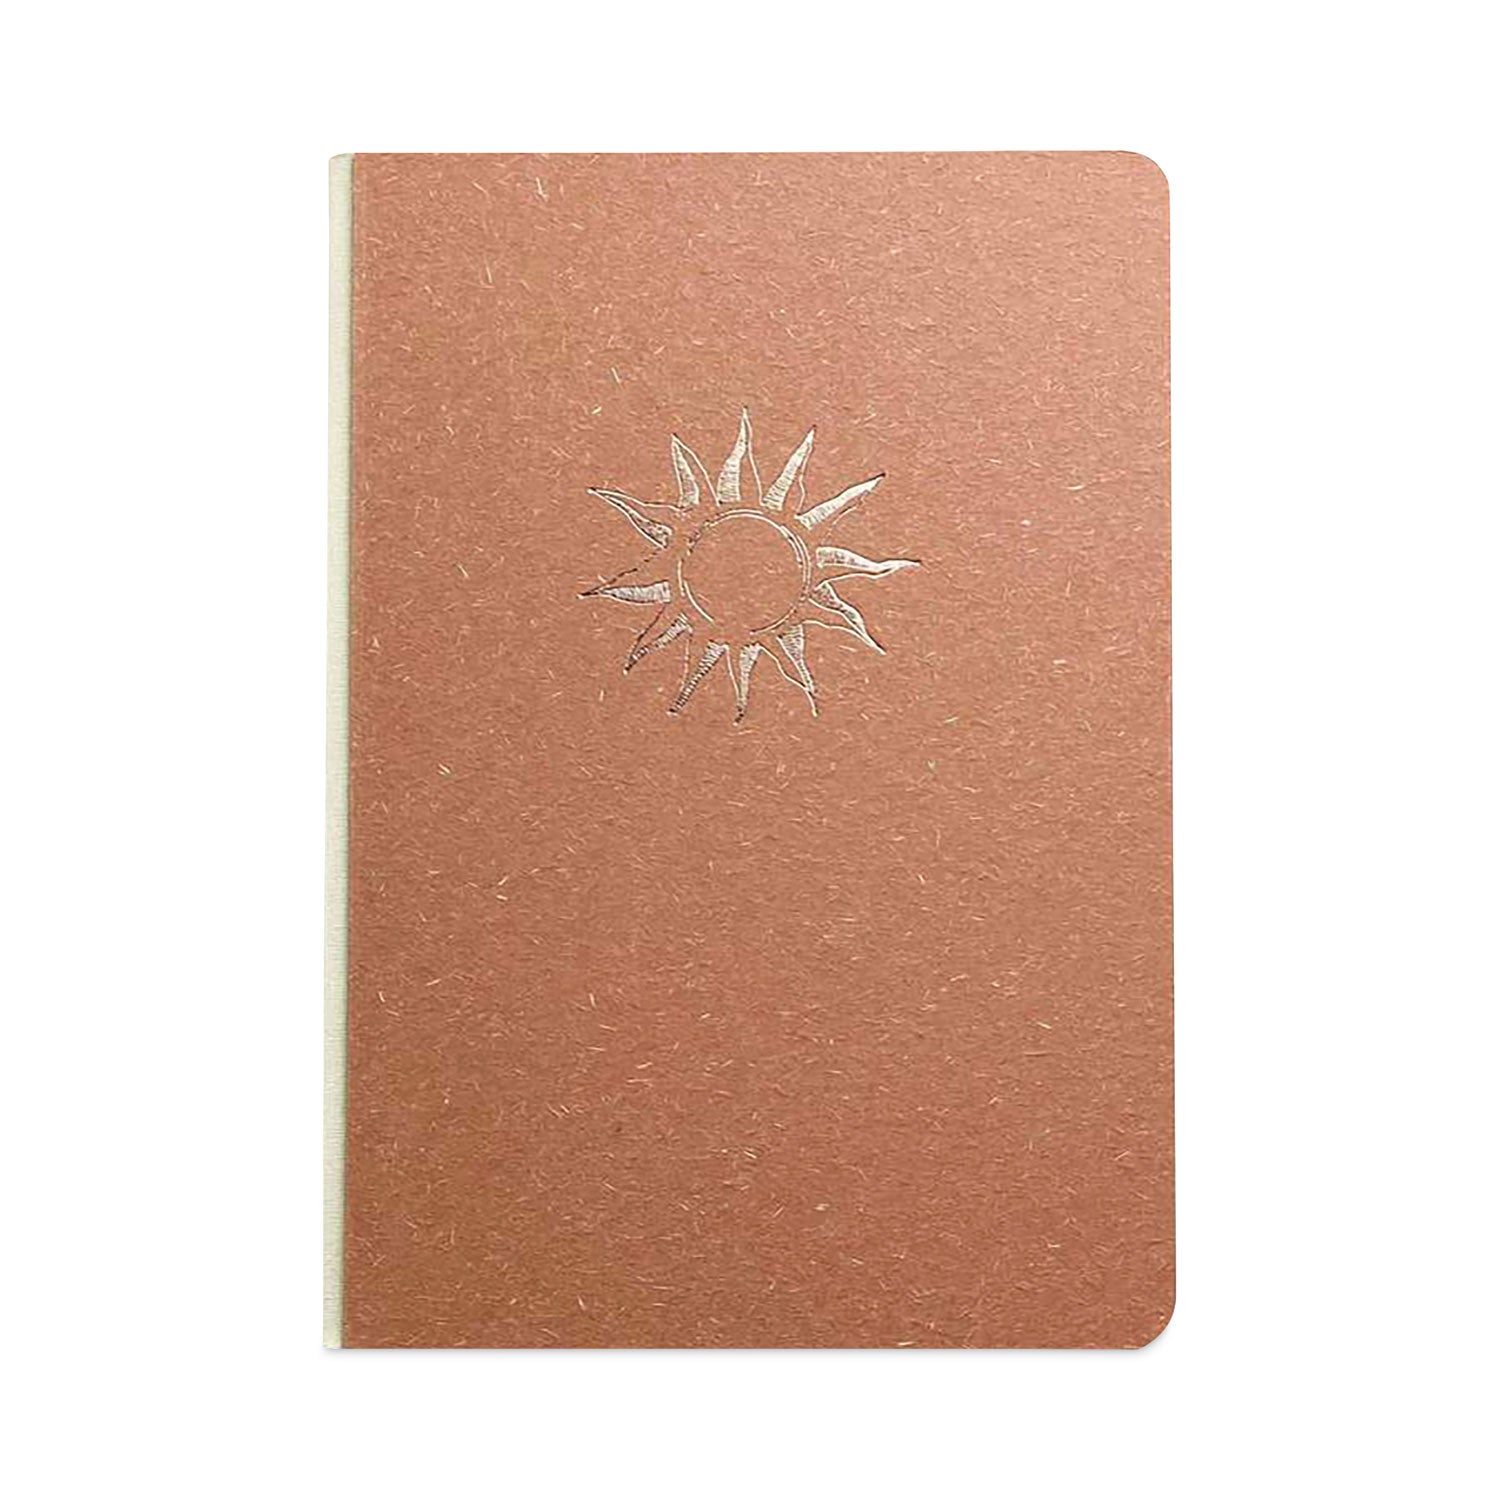 embossed-canvas-layflat-hardbound-journal-gold-rise-shine-artwork-dotted-rule-rose-brown-cream-cover-64-7-x-5-sheets_dnkcet569d - 1